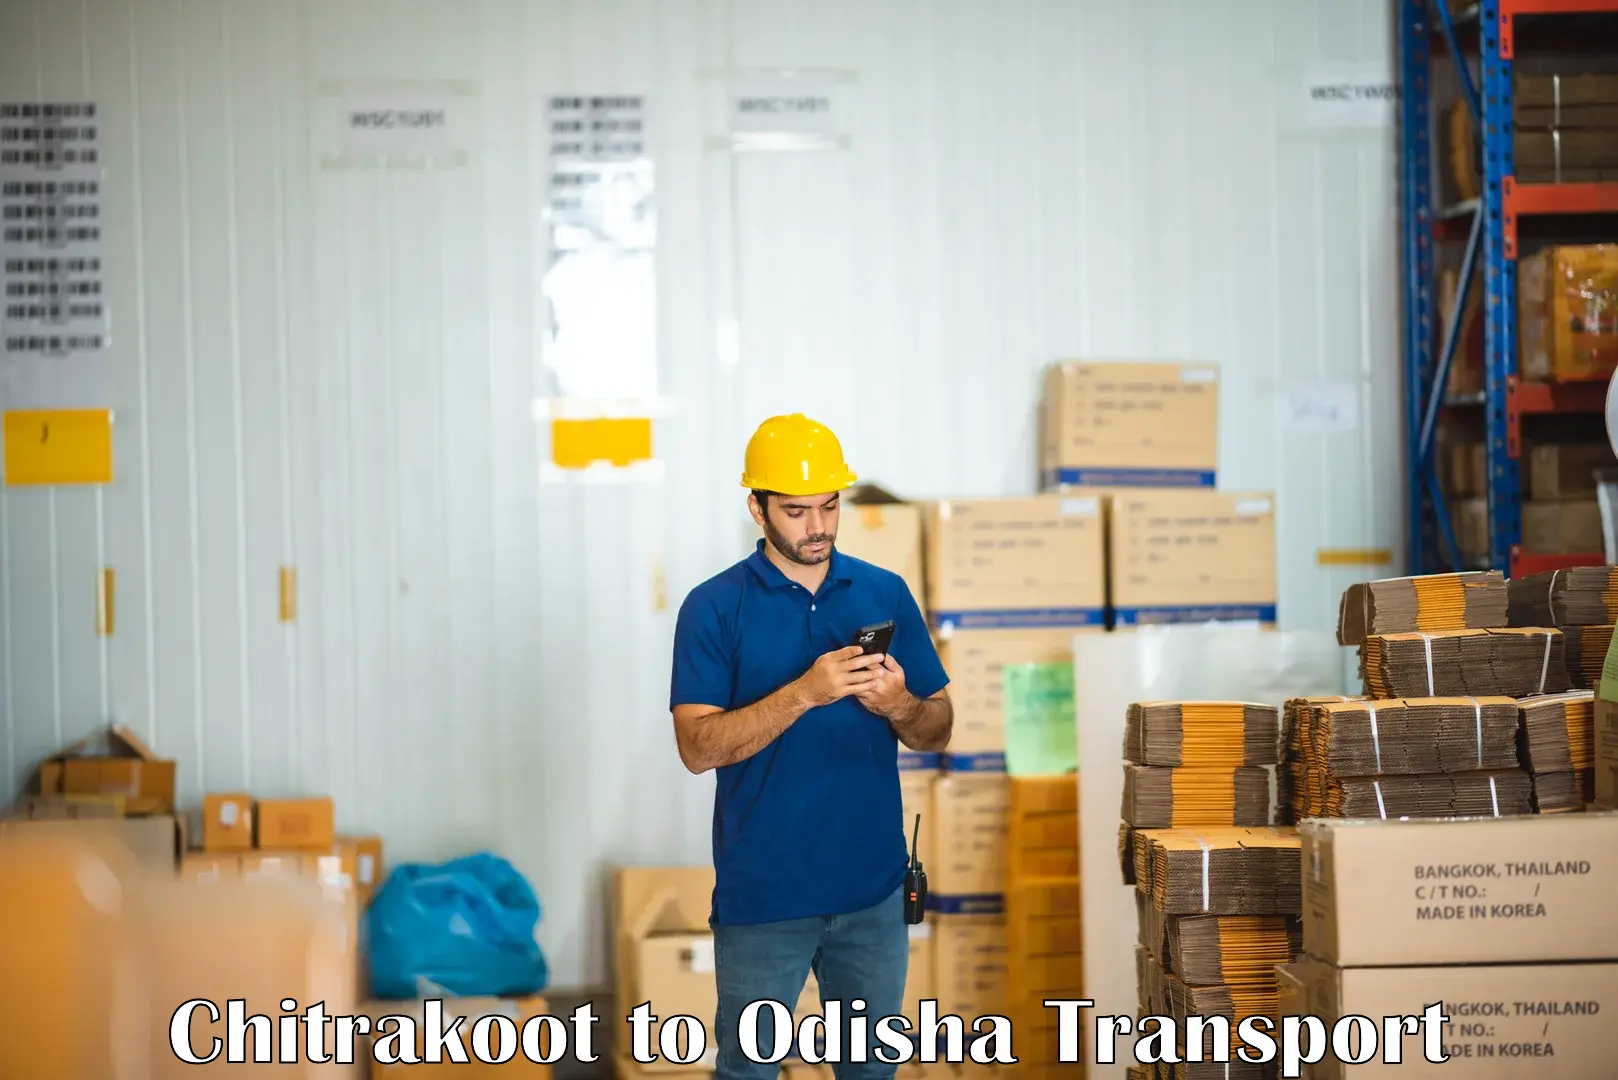 Container transport service Chitrakoot to Cuttack